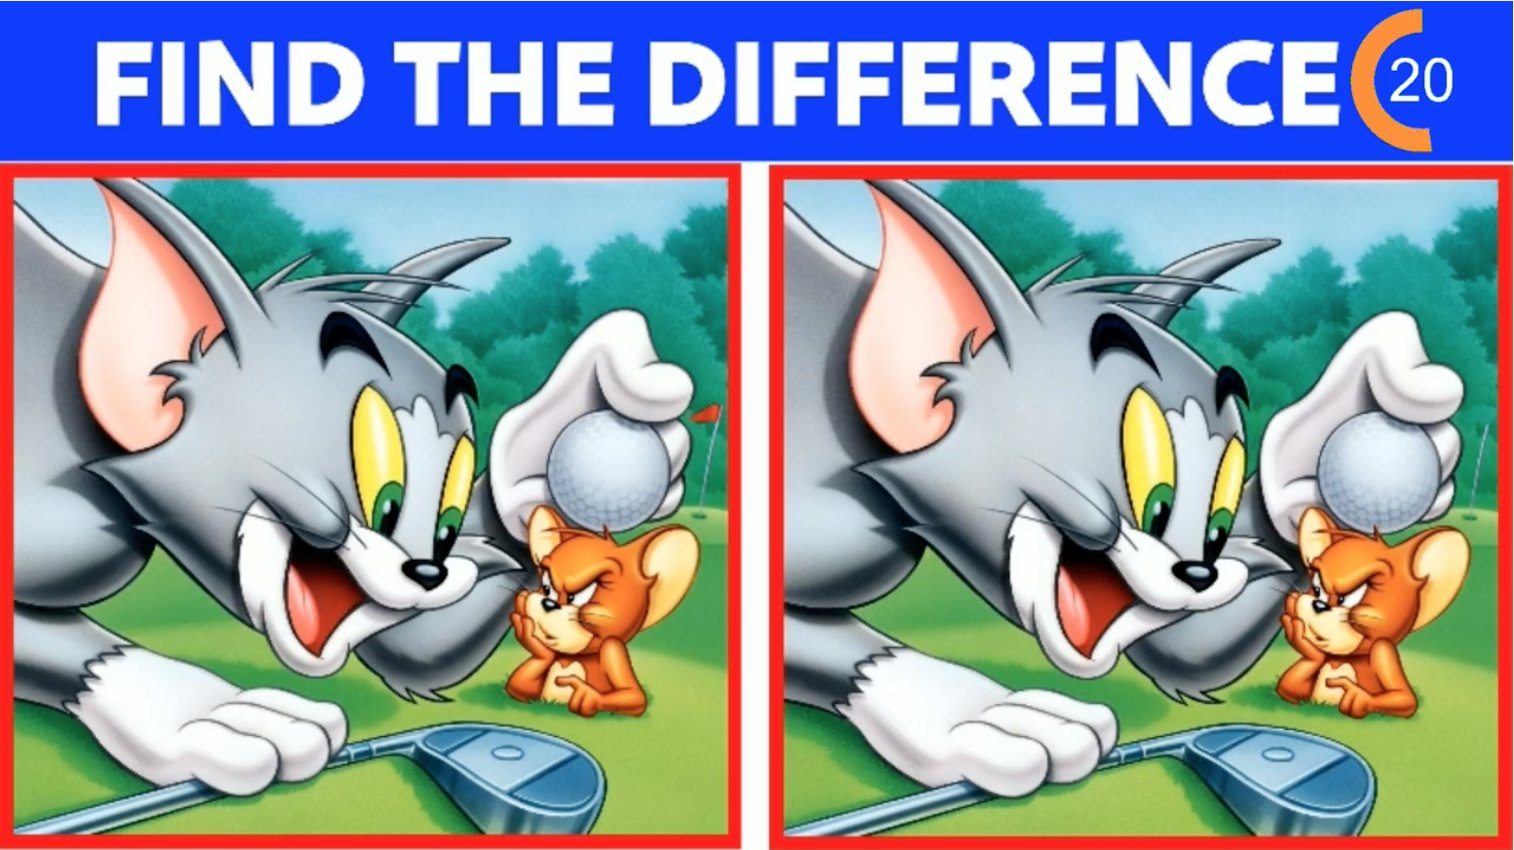 tom and jerry photo 1.png?resize=412,232 - Can You Spot The Difference Between These Two Tom And Jerry Photos?